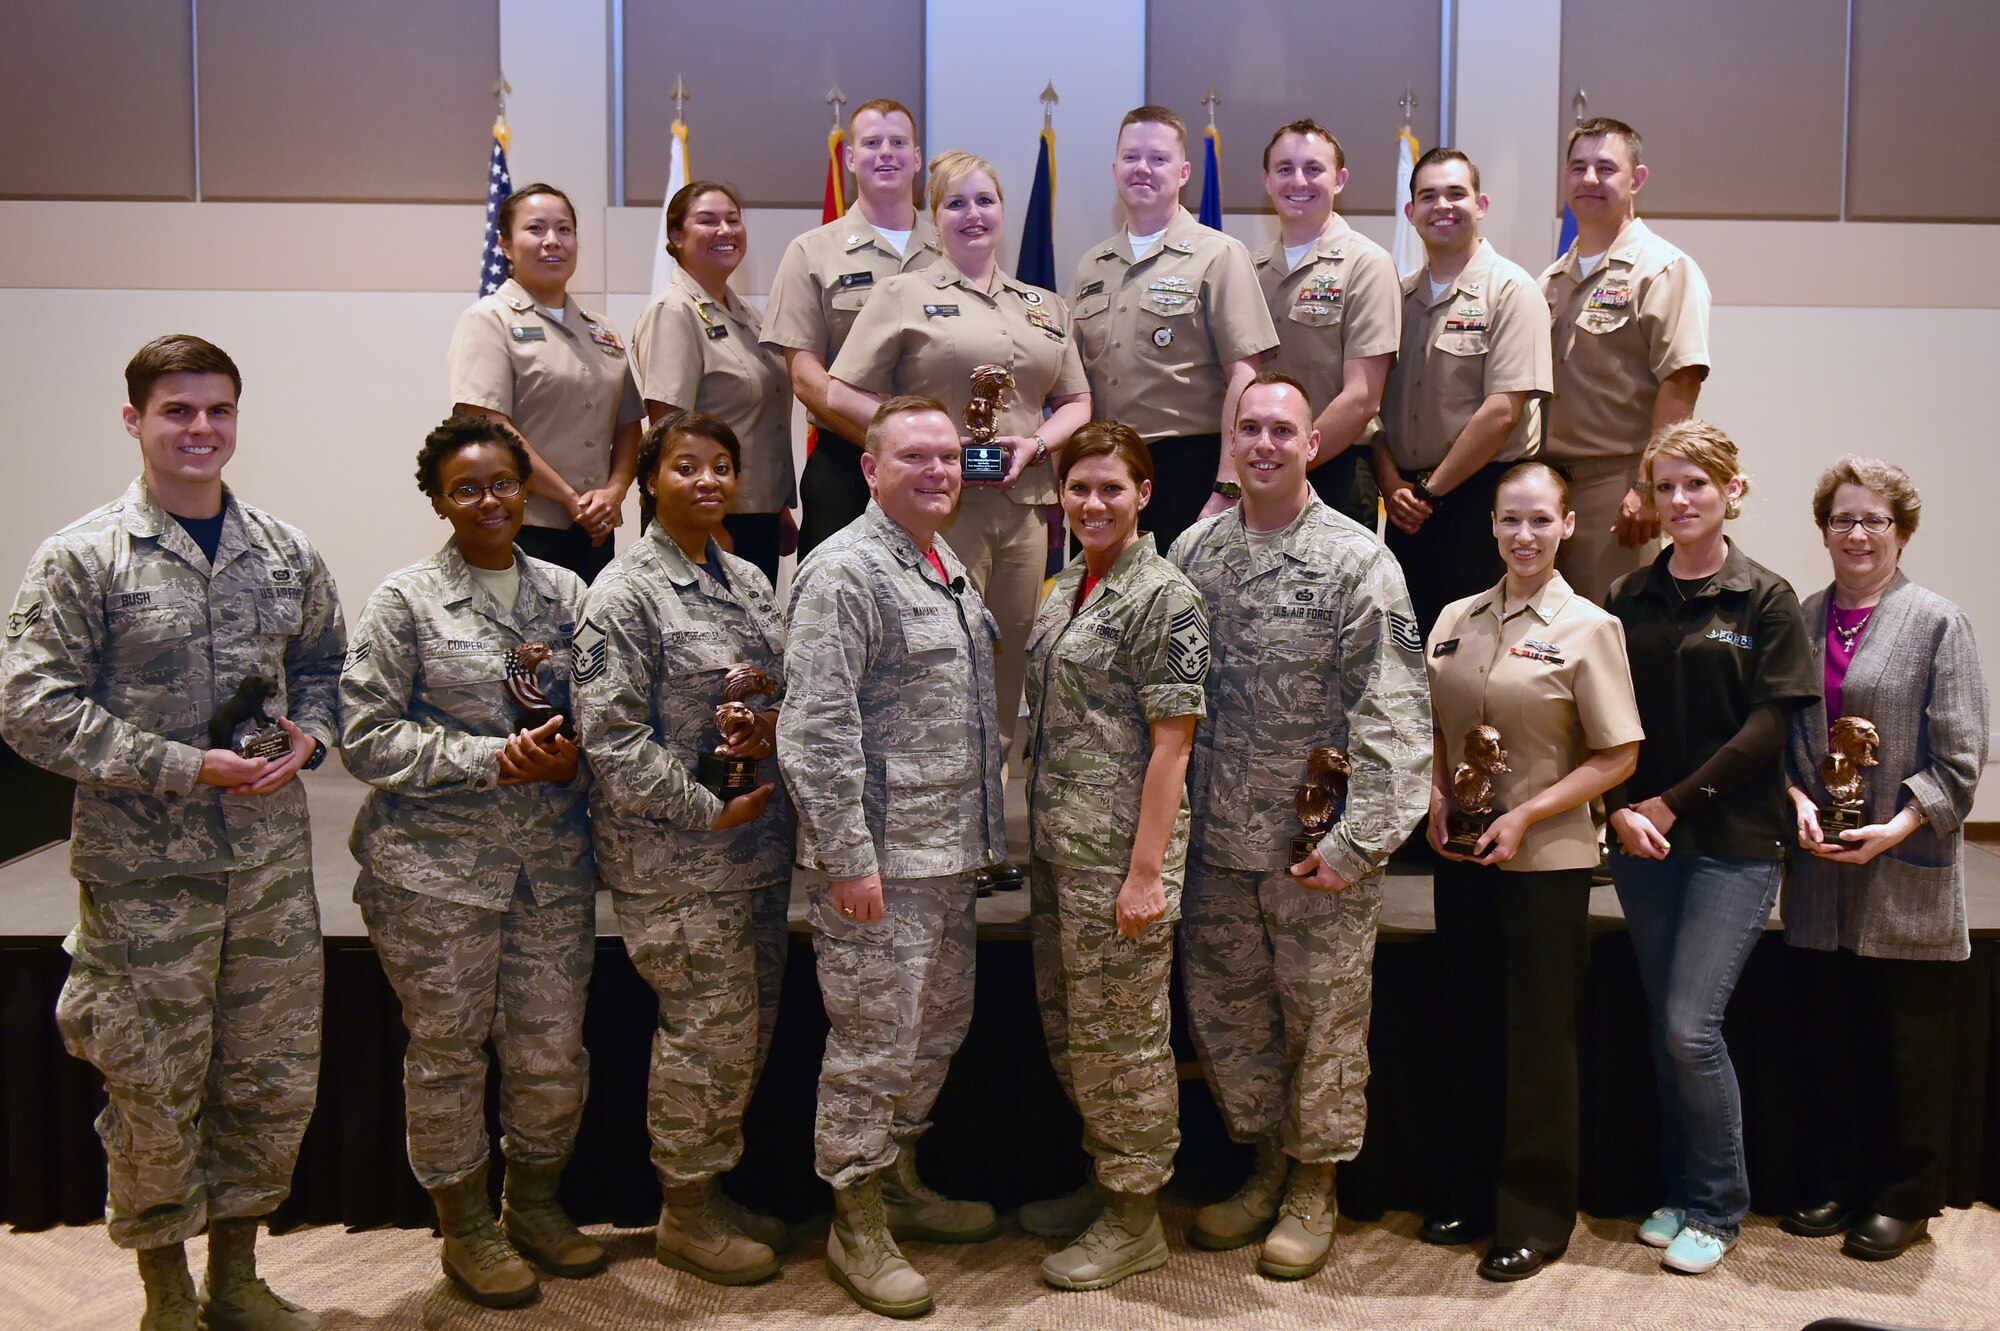 Team Buckley quarterly award winners stand alongside Brig. Gen. Samuel C. Mahaney, Air Reserve Personnel Center commander, and Chief Master Sgt. Ruthe Flores, ARPC command chief, on May 1, 2015, at the Leadership Development Center on Buckley Air Force Base, Colo. The award winners were chosen because of their hard work and dedication in their work centers. (U.S. Air Force photo by Airman 1st Class Luke W. Nowakowski/Released)
